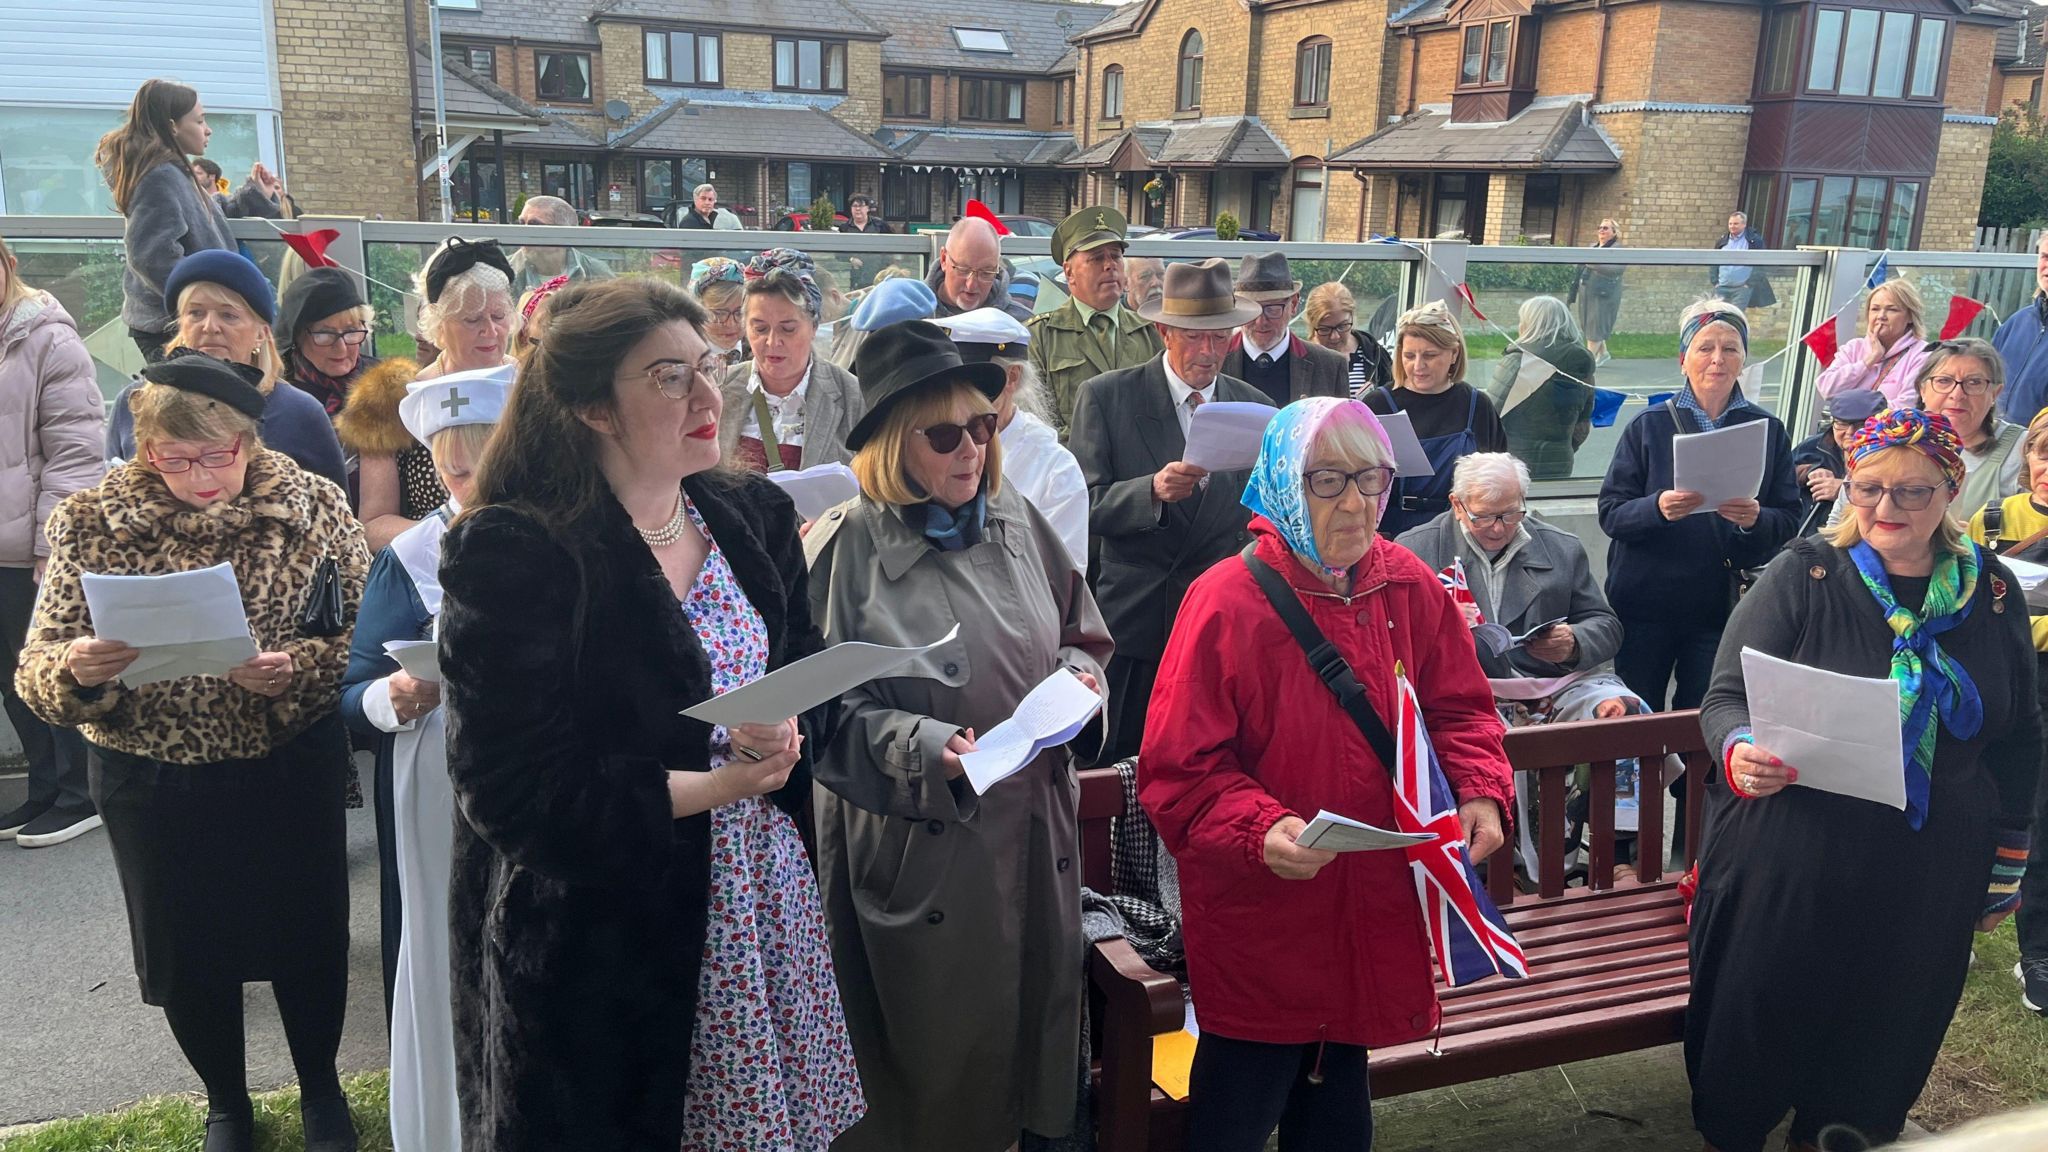 A choir singing at the Hessle Foreshore as part of the D-Day anniversary